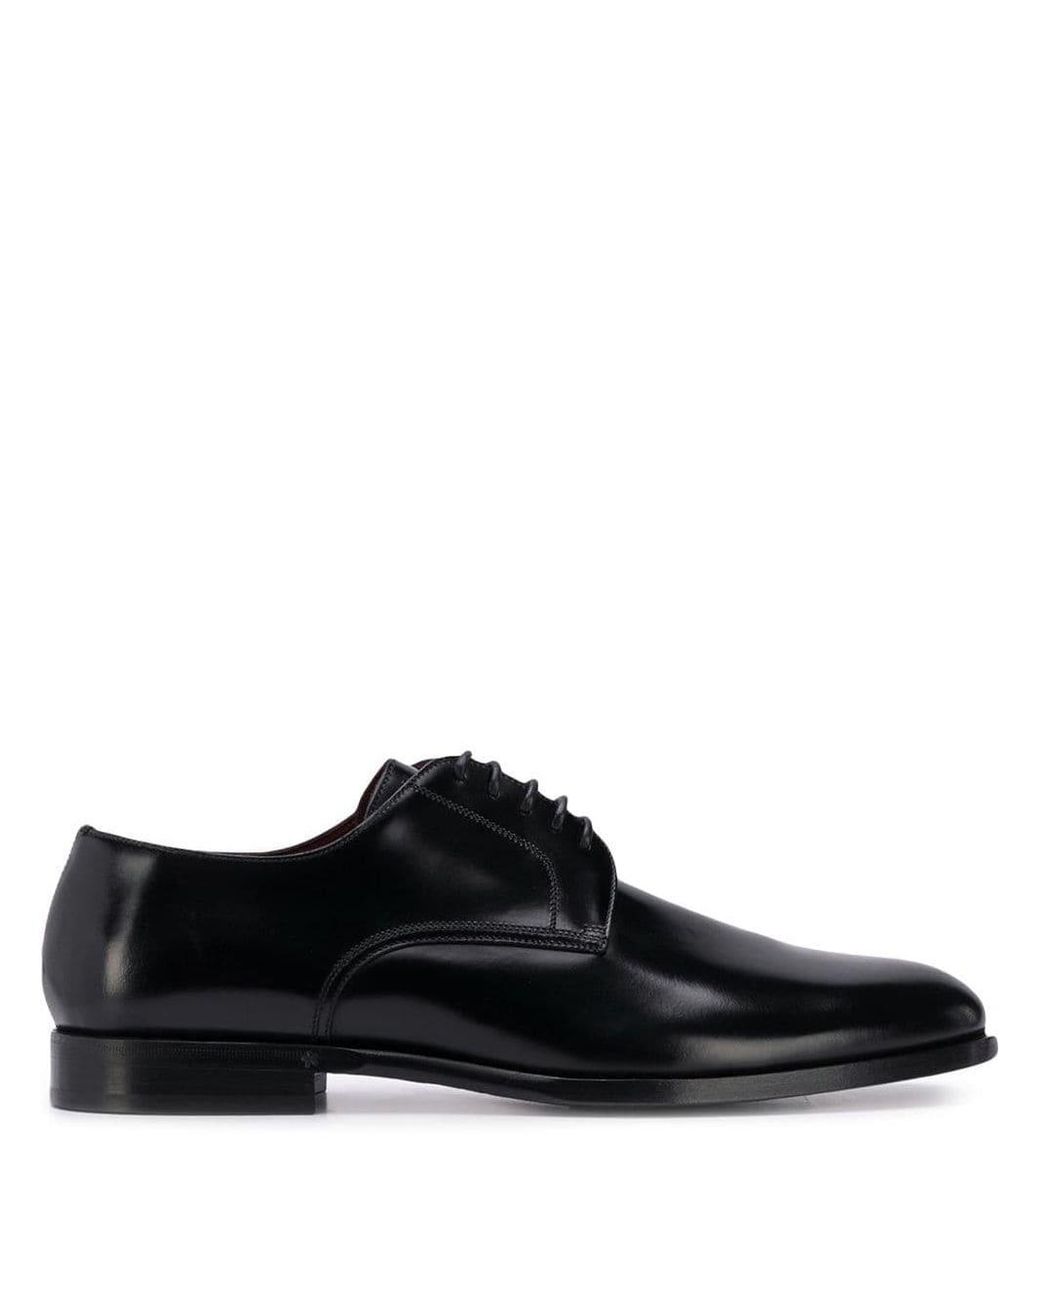 Dolce & Gabbana Leather Derby Shoes in Black for Men - Save 23% - Lyst